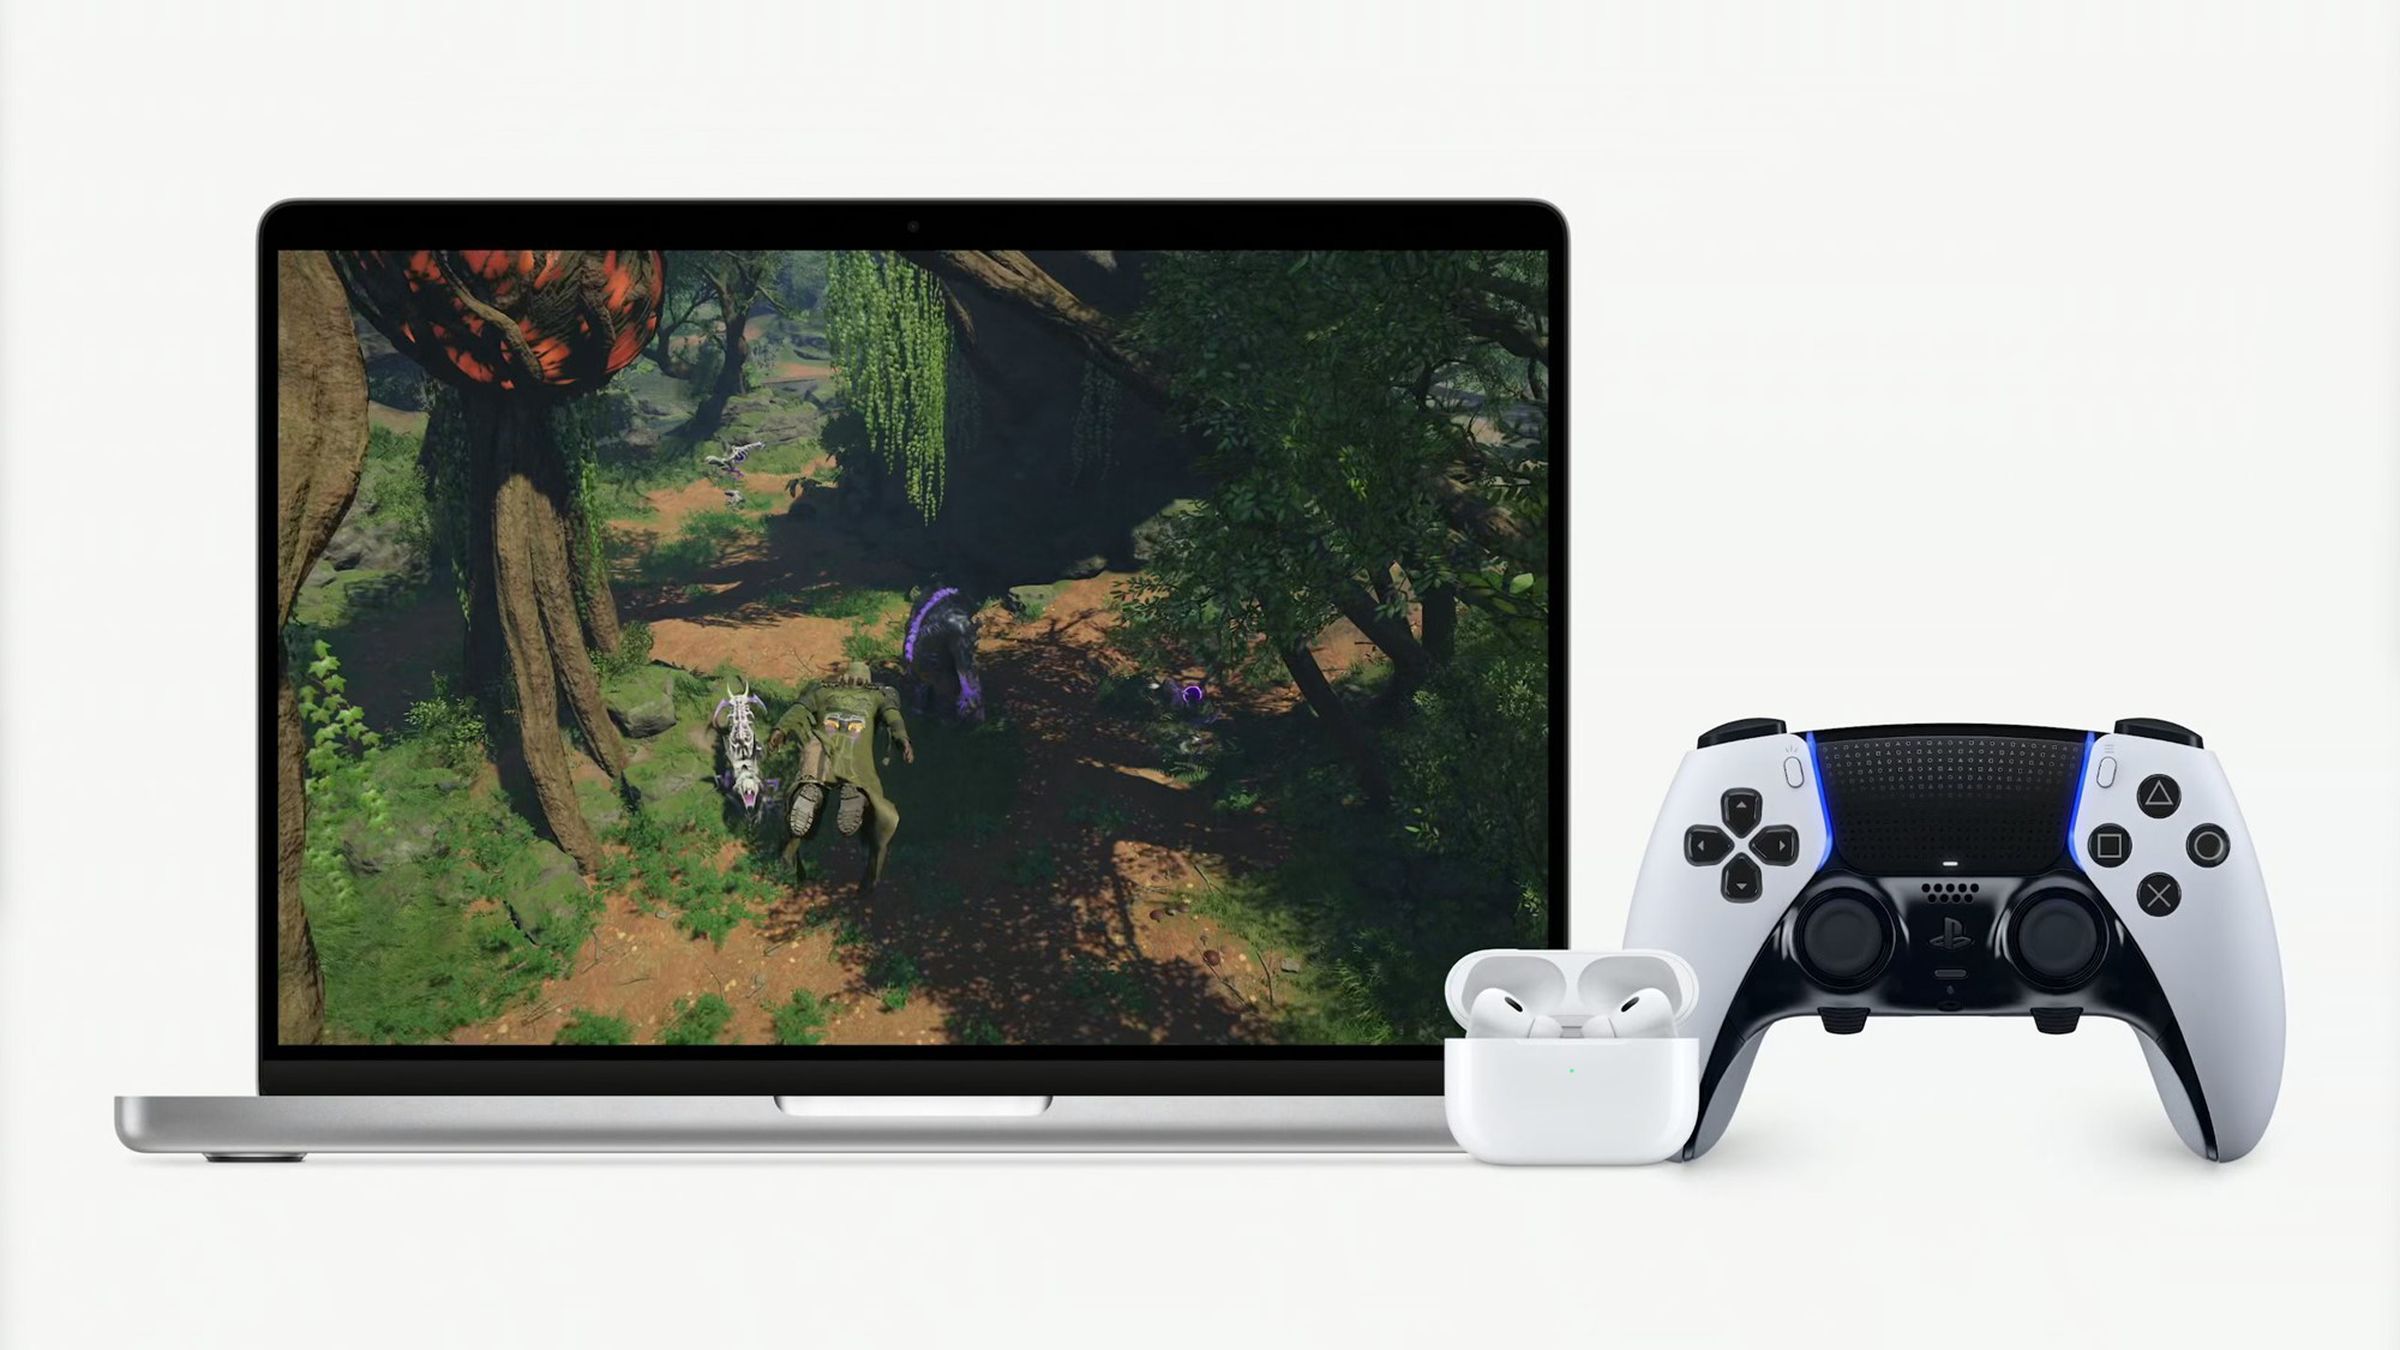 Apple MacBook shown with DualSense PS5 controller and AirPods.